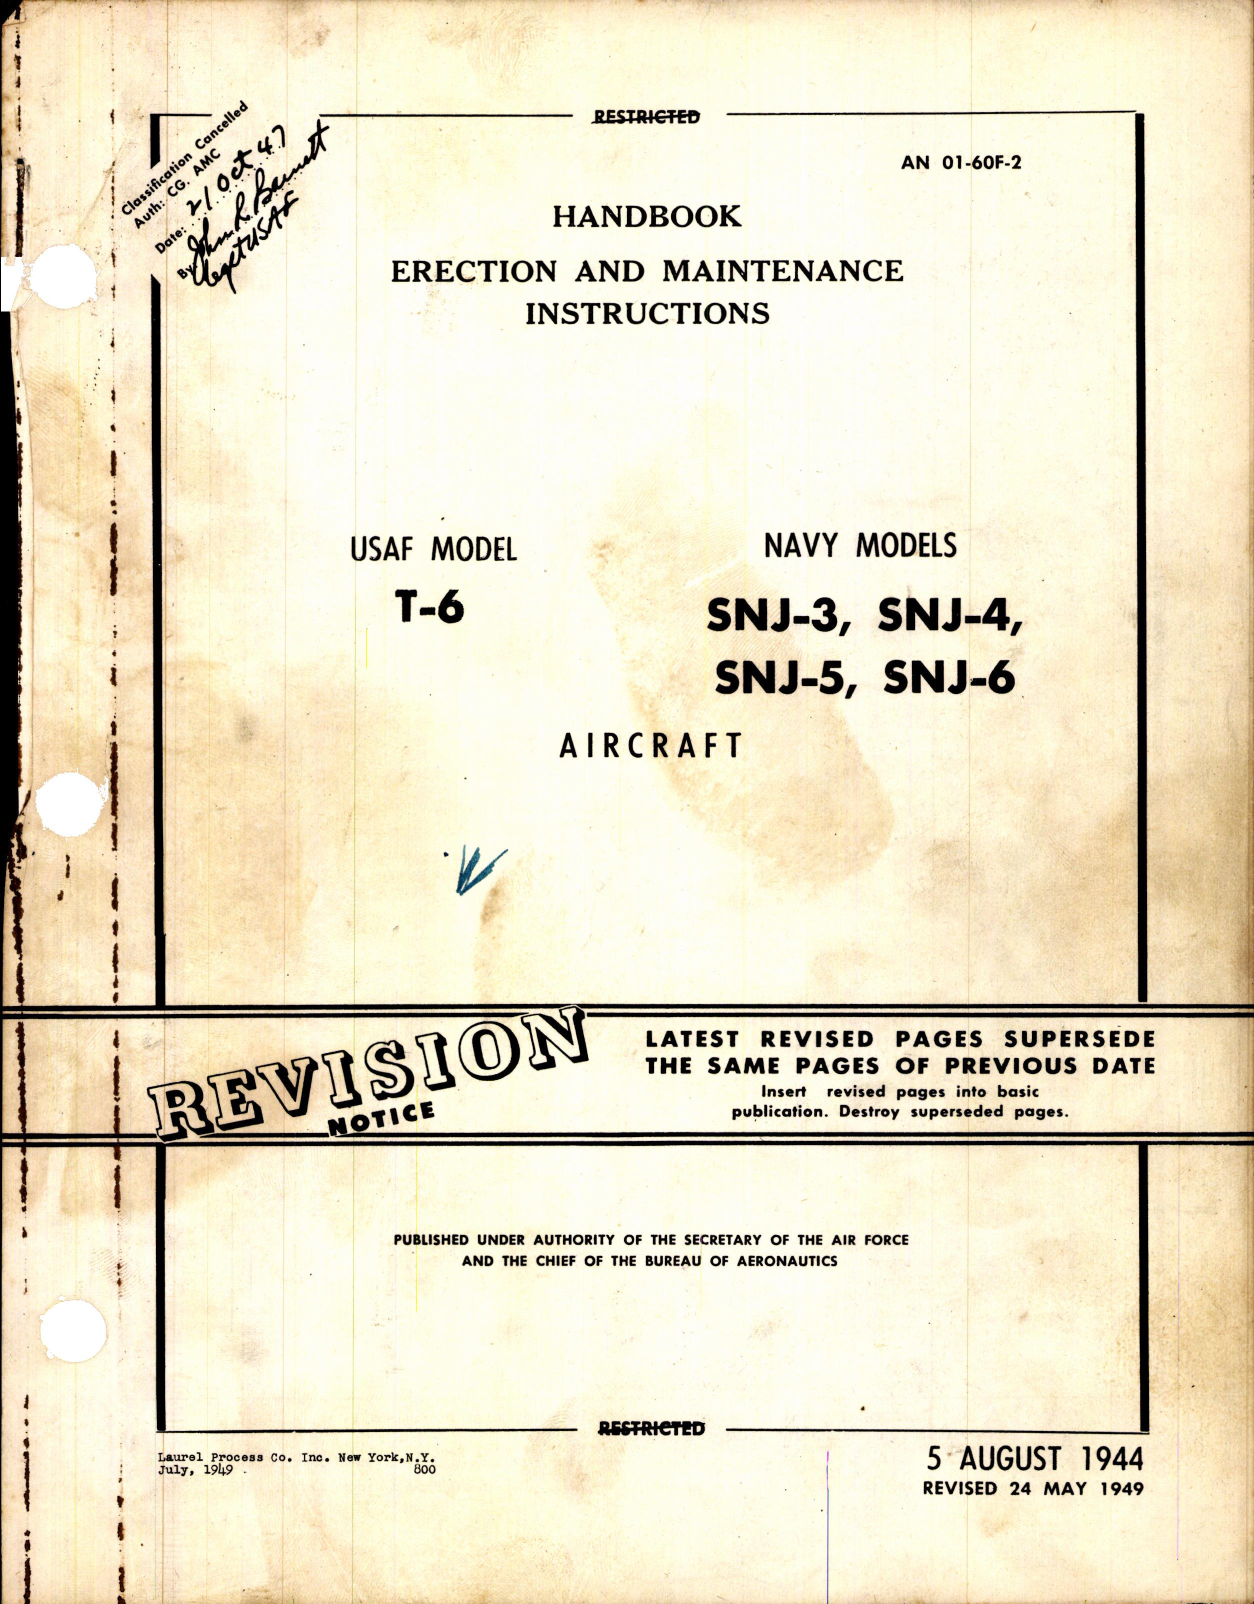 Sample page 1 from AirCorps Library document: Erection and Maintenance Instructions for T-6